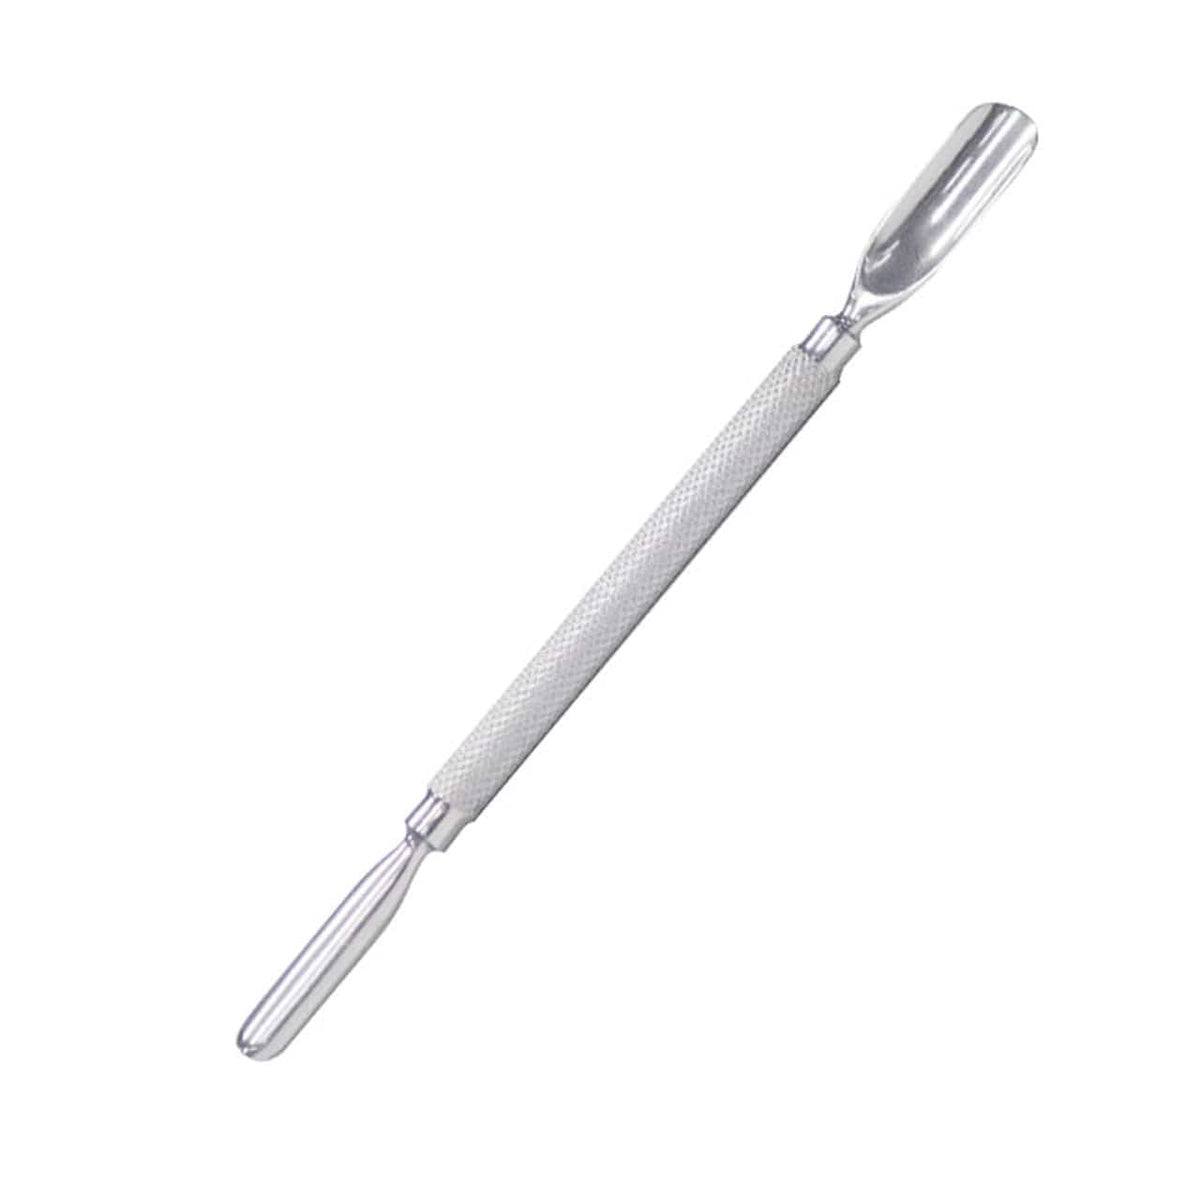 SlickPour Dual Metal Pusher / Spoon Nails - Young Nails - Luxe Pacifique